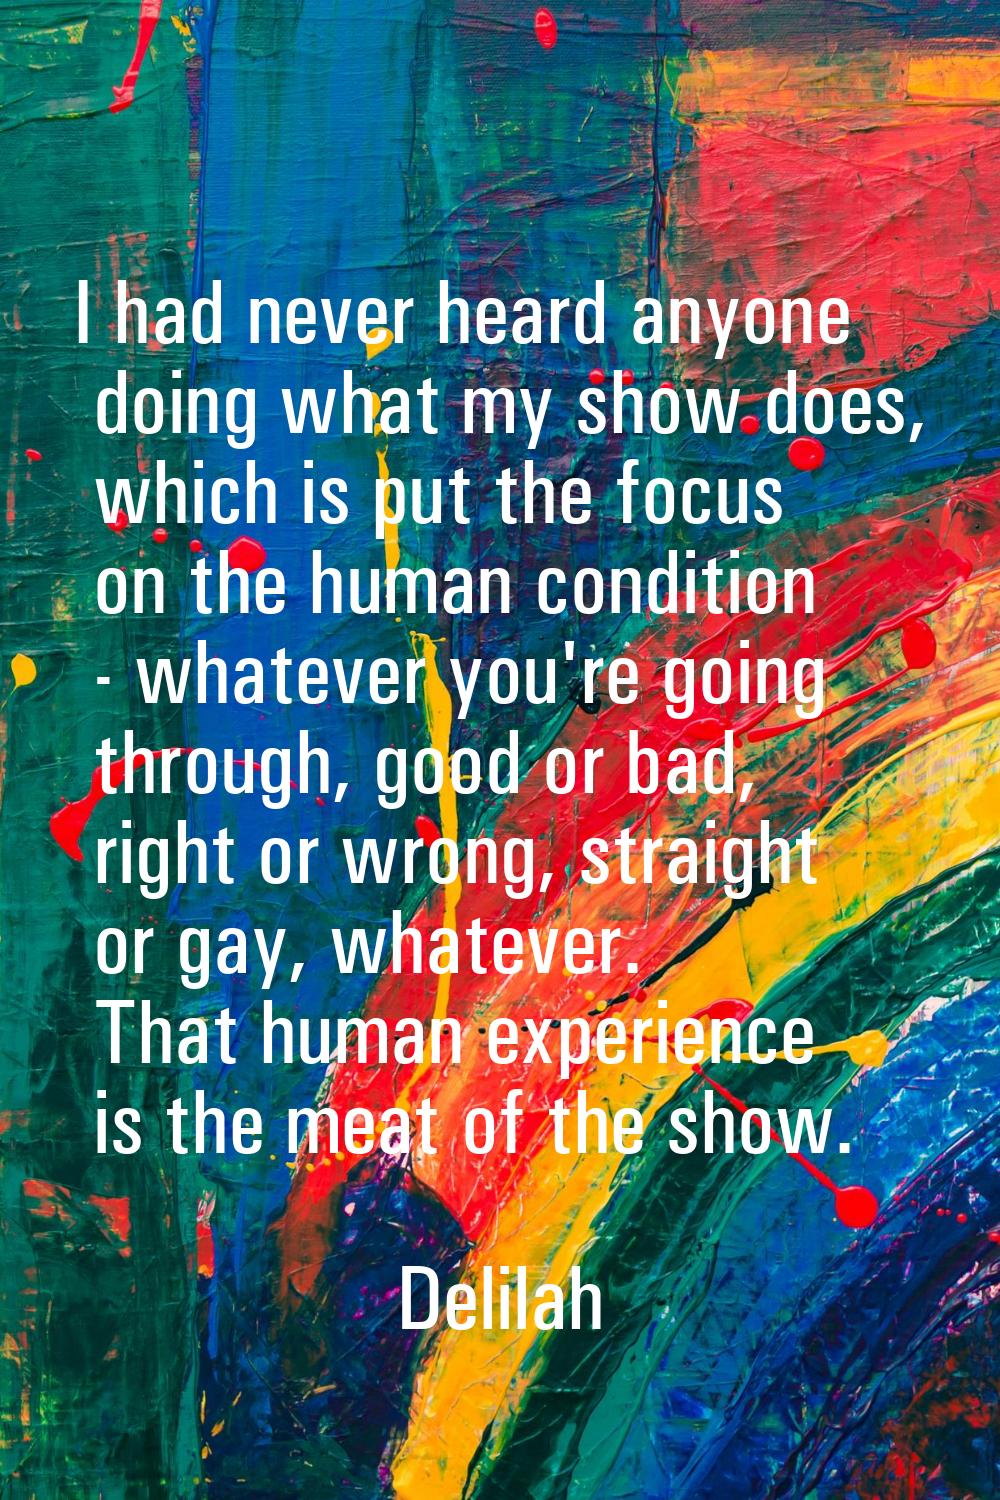 I had never heard anyone doing what my show does, which is put the focus on the human condition - w